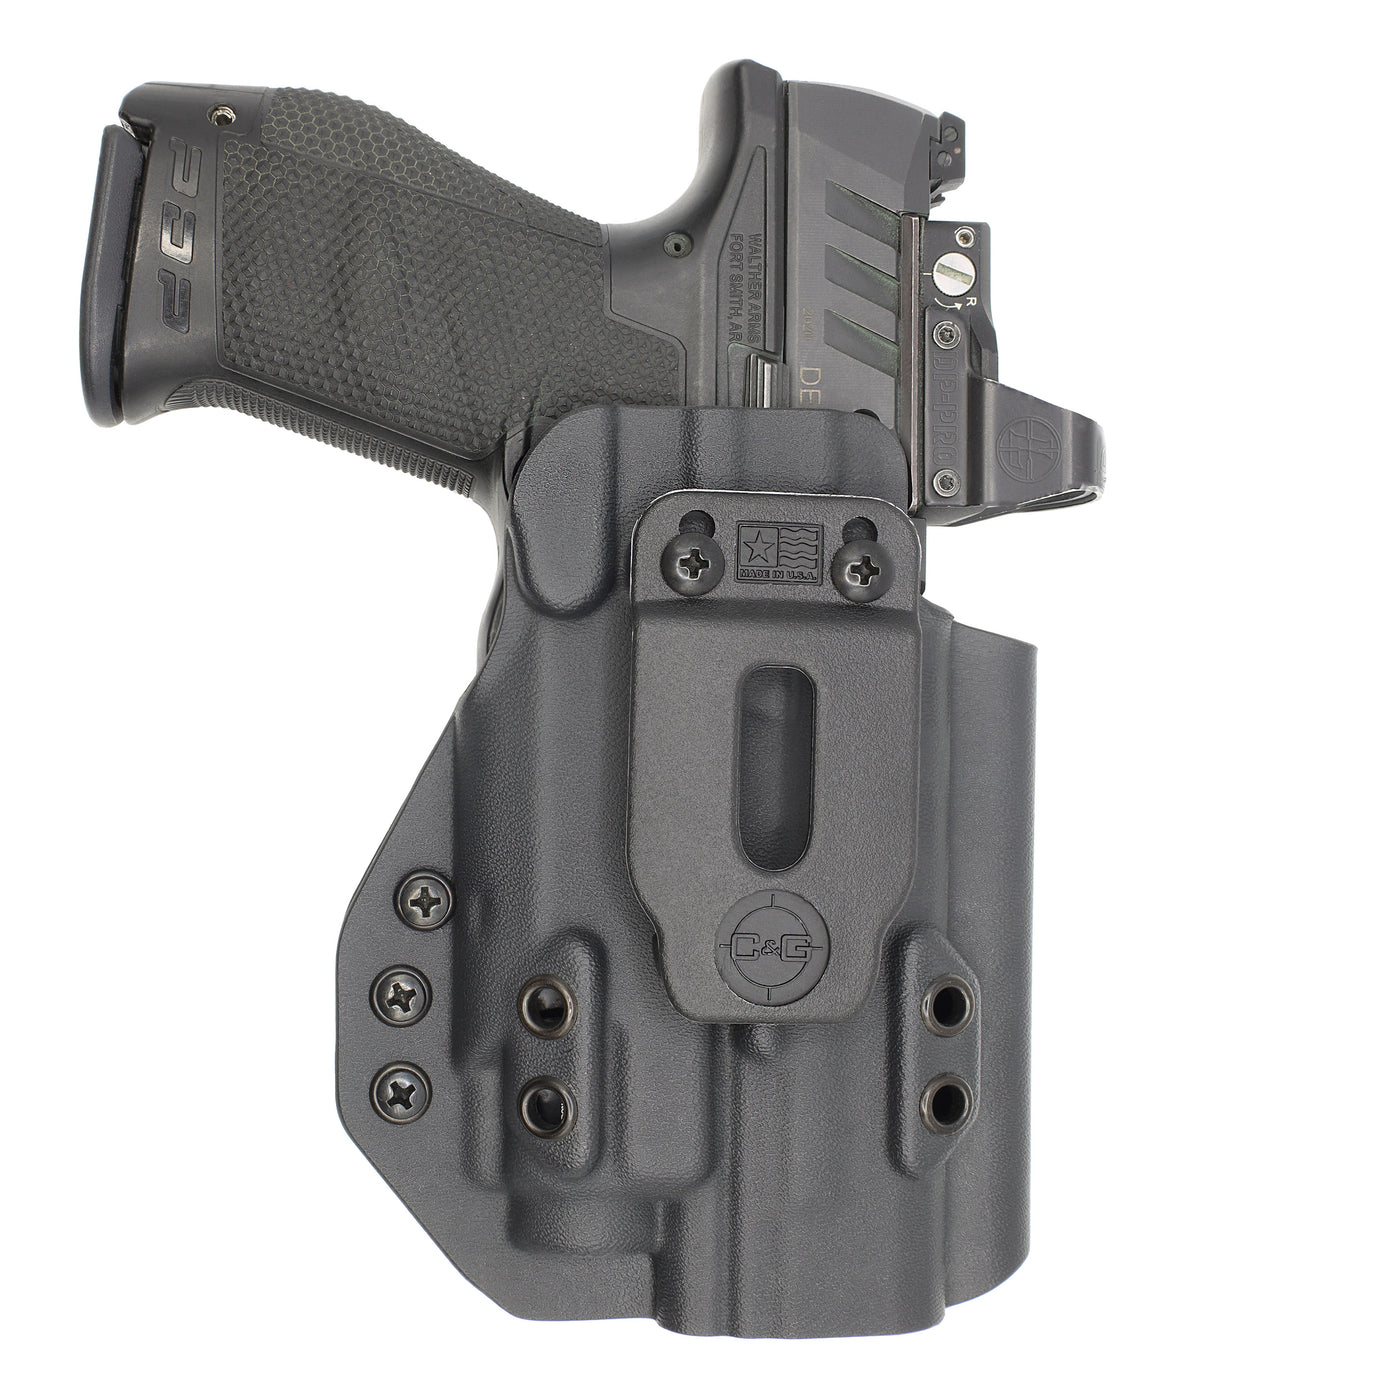 C&G Holsters quickship IWB Tactical CZ P07 streamlight TLR8 holstered